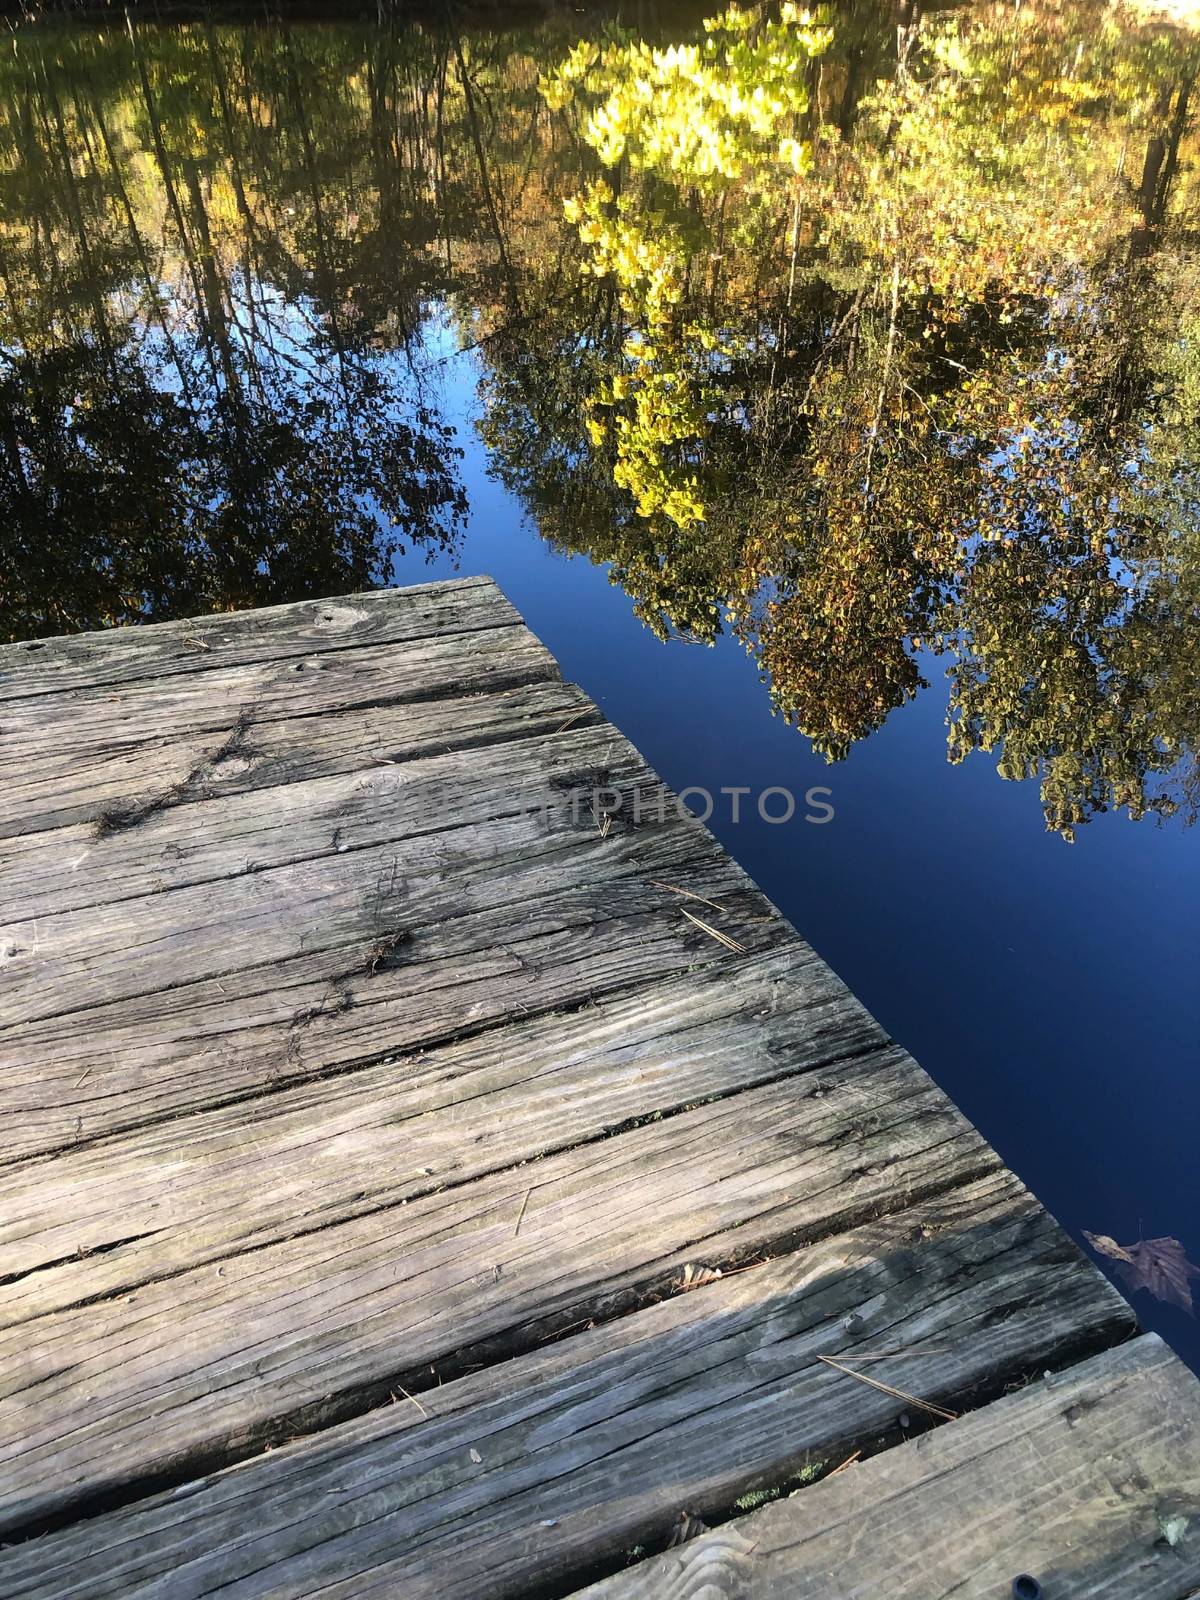 Autumn leaves and blue sky are reflected in a woodland lake , wooden dock in foreground.